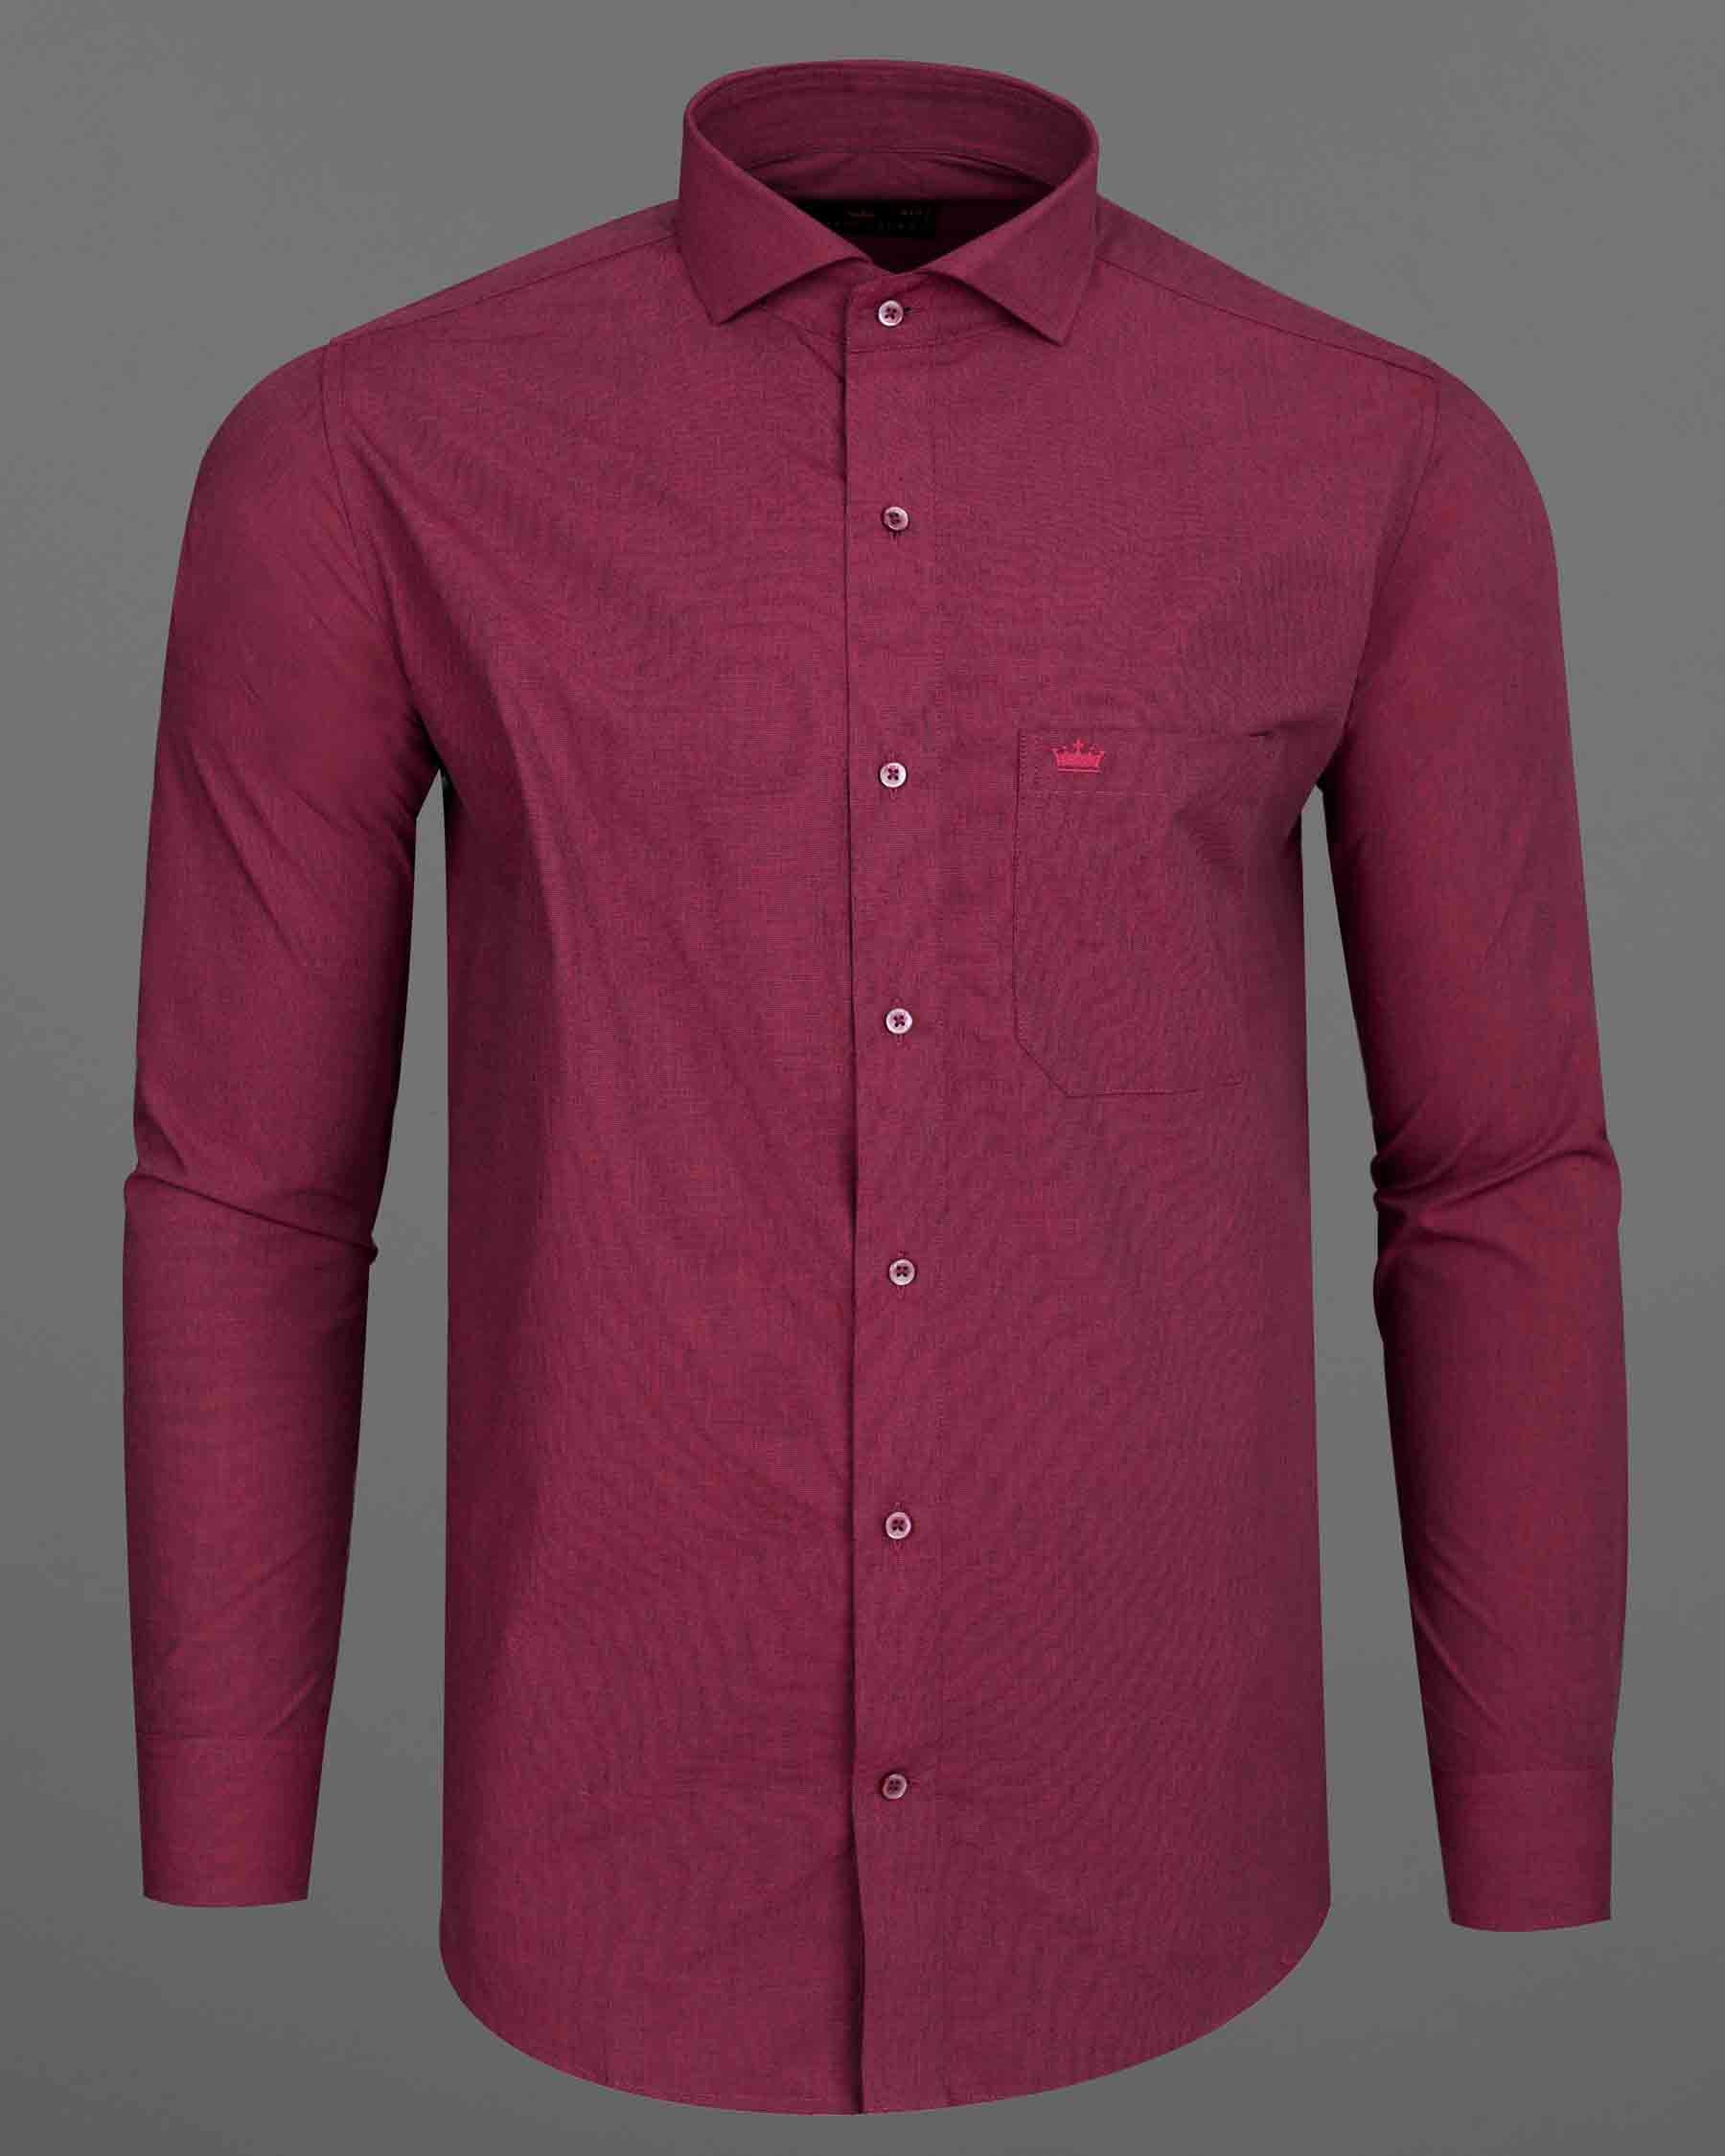 Scarlet Red Chambray Textured Premium Cotton Shirt 7839-CA-MN-38,7839-CA-MN-38,7839-CA-MN-39,7839-CA-MN-39,7839-CA-MN-40,7839-CA-MN-40,7839-CA-MN-42,7839-CA-MN-42,7839-CA-MN-44,7839-CA-MN-44,7839-CA-MN-46,7839-CA-MN-46,7839-CA-MN-48,7839-CA-MN-48,7839-CA-MN-50,7839-CA-MN-50,7839-CA-MN-52,7839-CA-MN-52